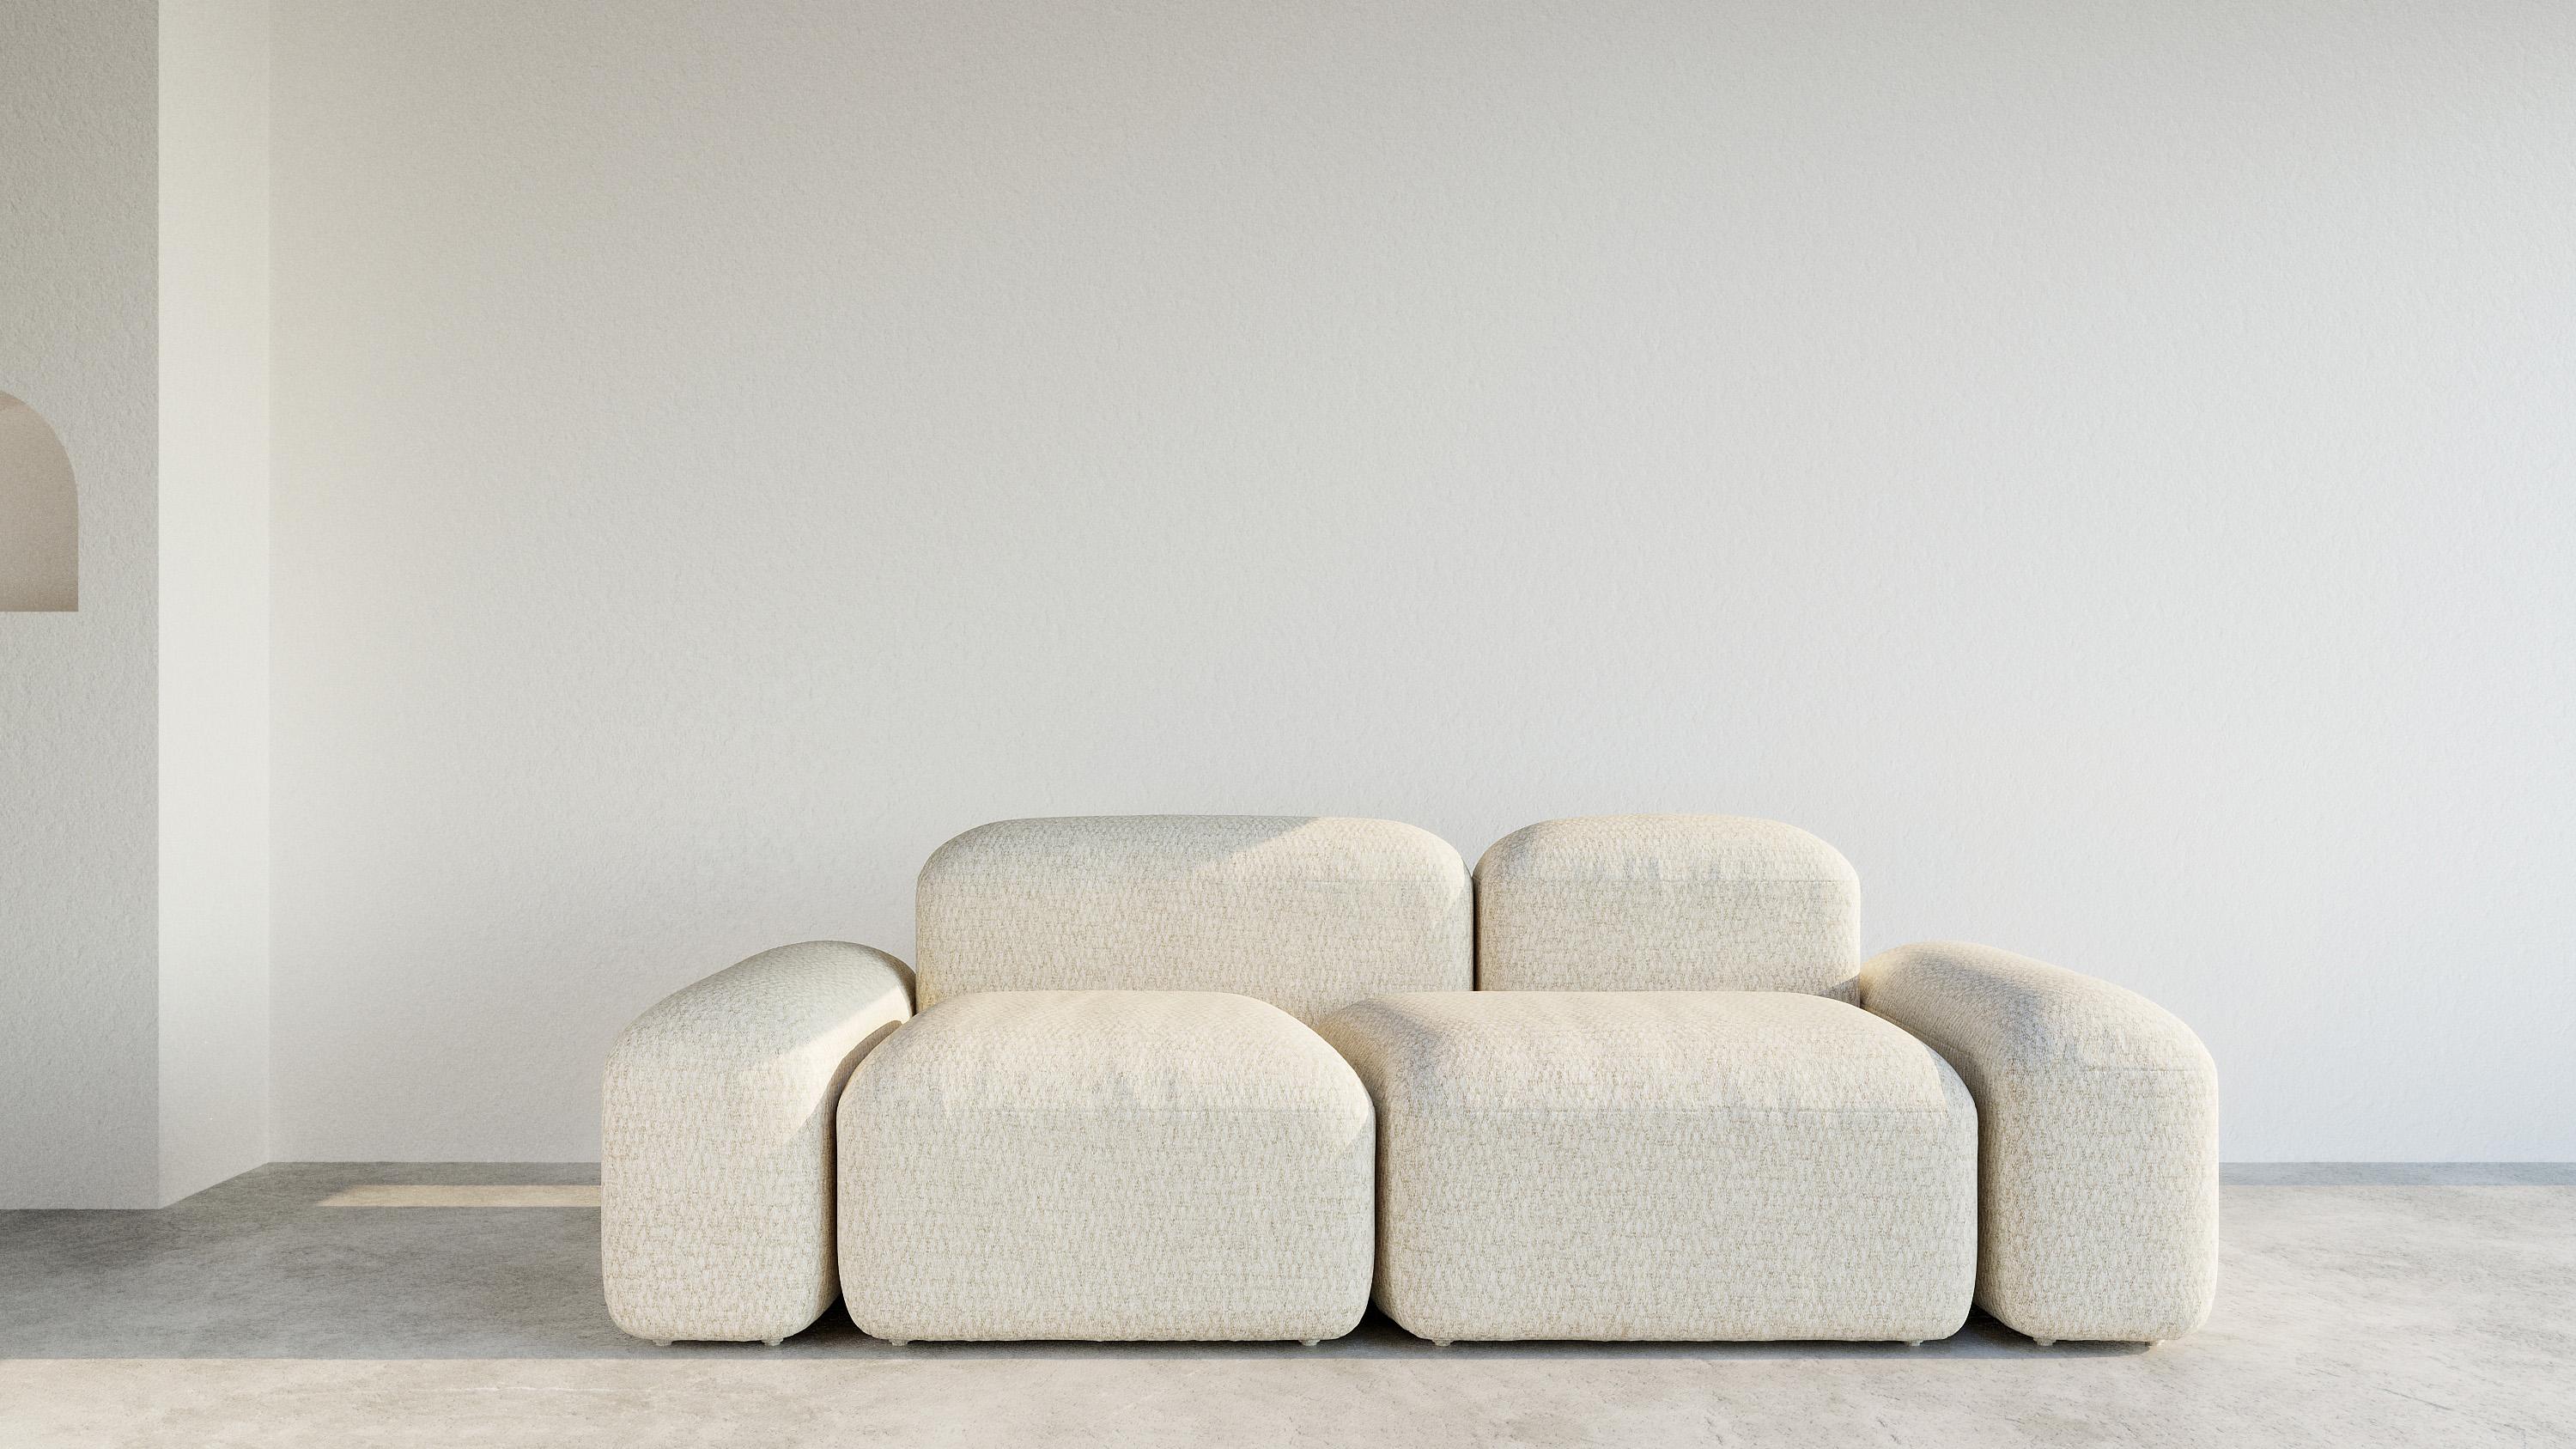 'Lapis' is a collection of sofas and seats with very organic and Minimalist shapes. 
Designer: Emanuel Gargano
Maker: Amura Lab 

LAPIS 030
2 seaters / 222cm L

'Lapis' can be made in several dimension and combinations, according to spaces and